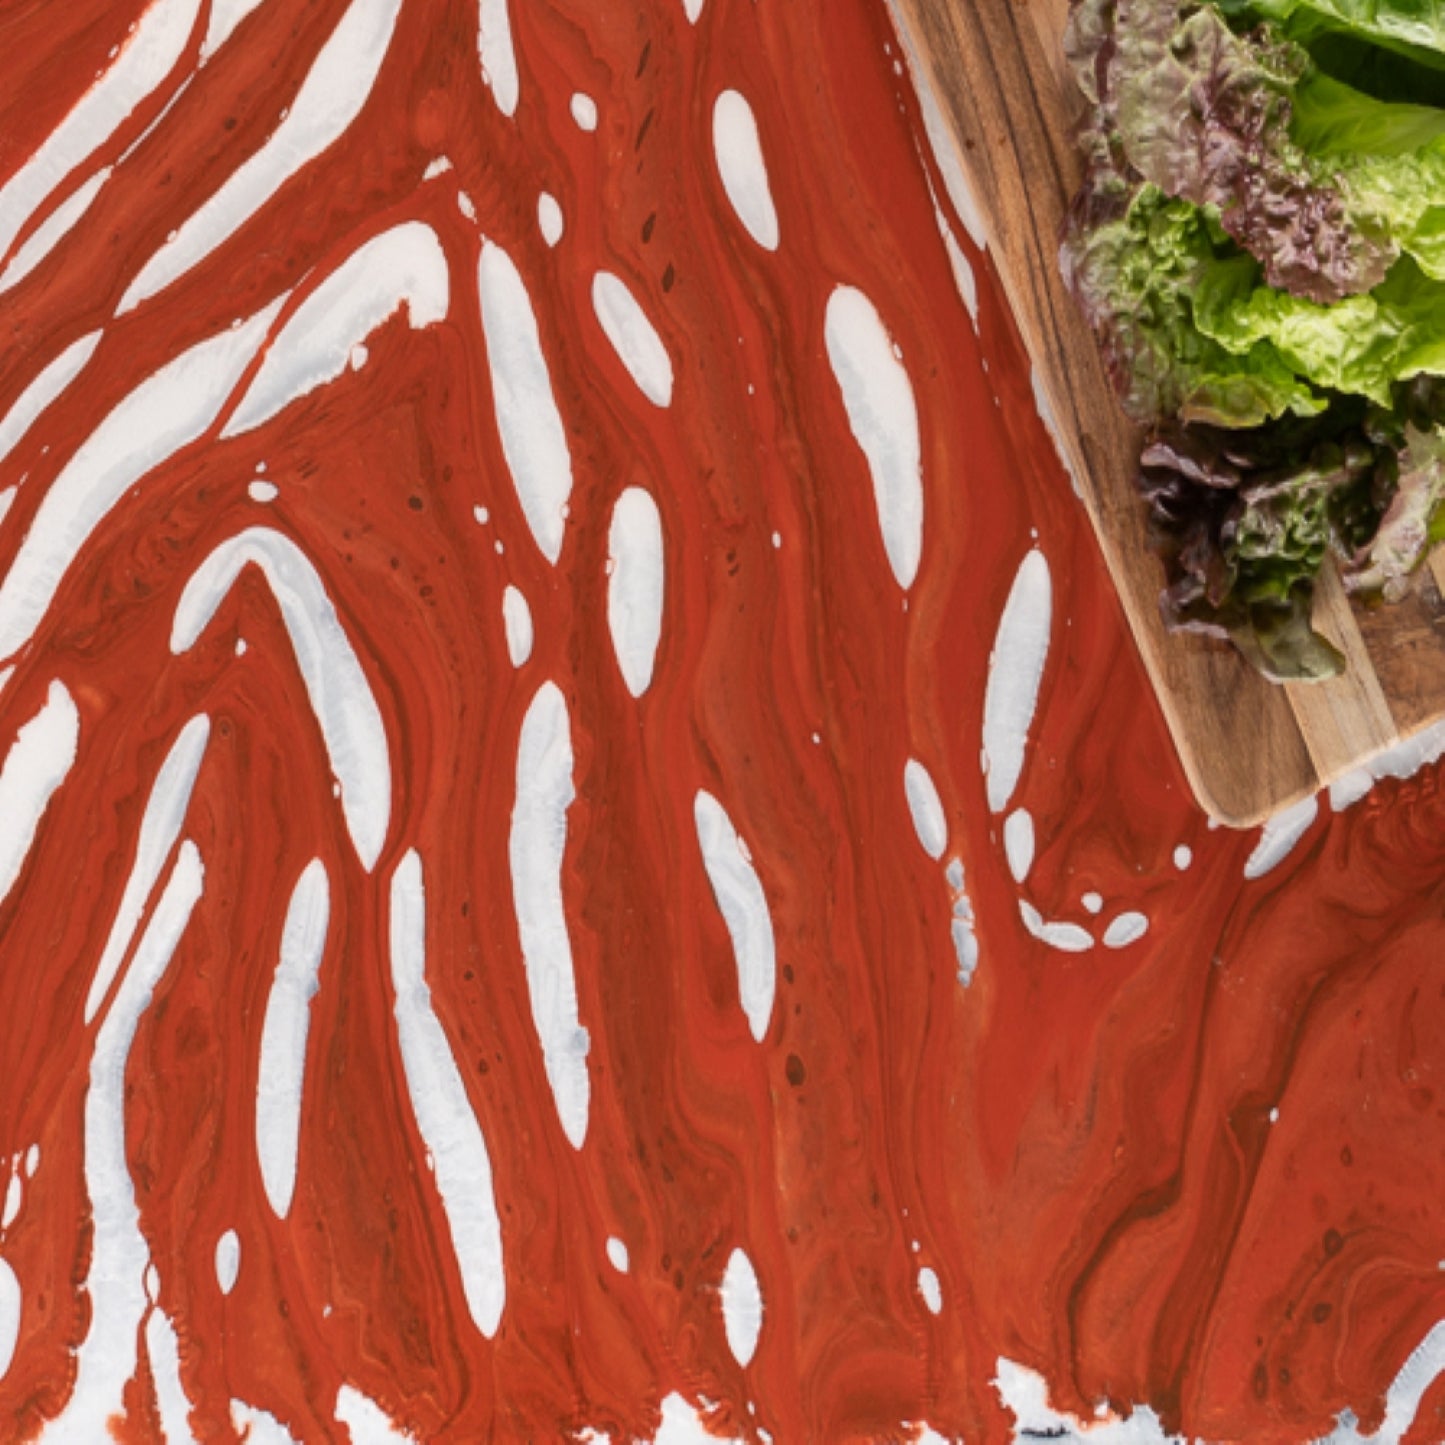 Epoxy Creativity: Use resins to craft a new and vibrant epoxy countertop surface